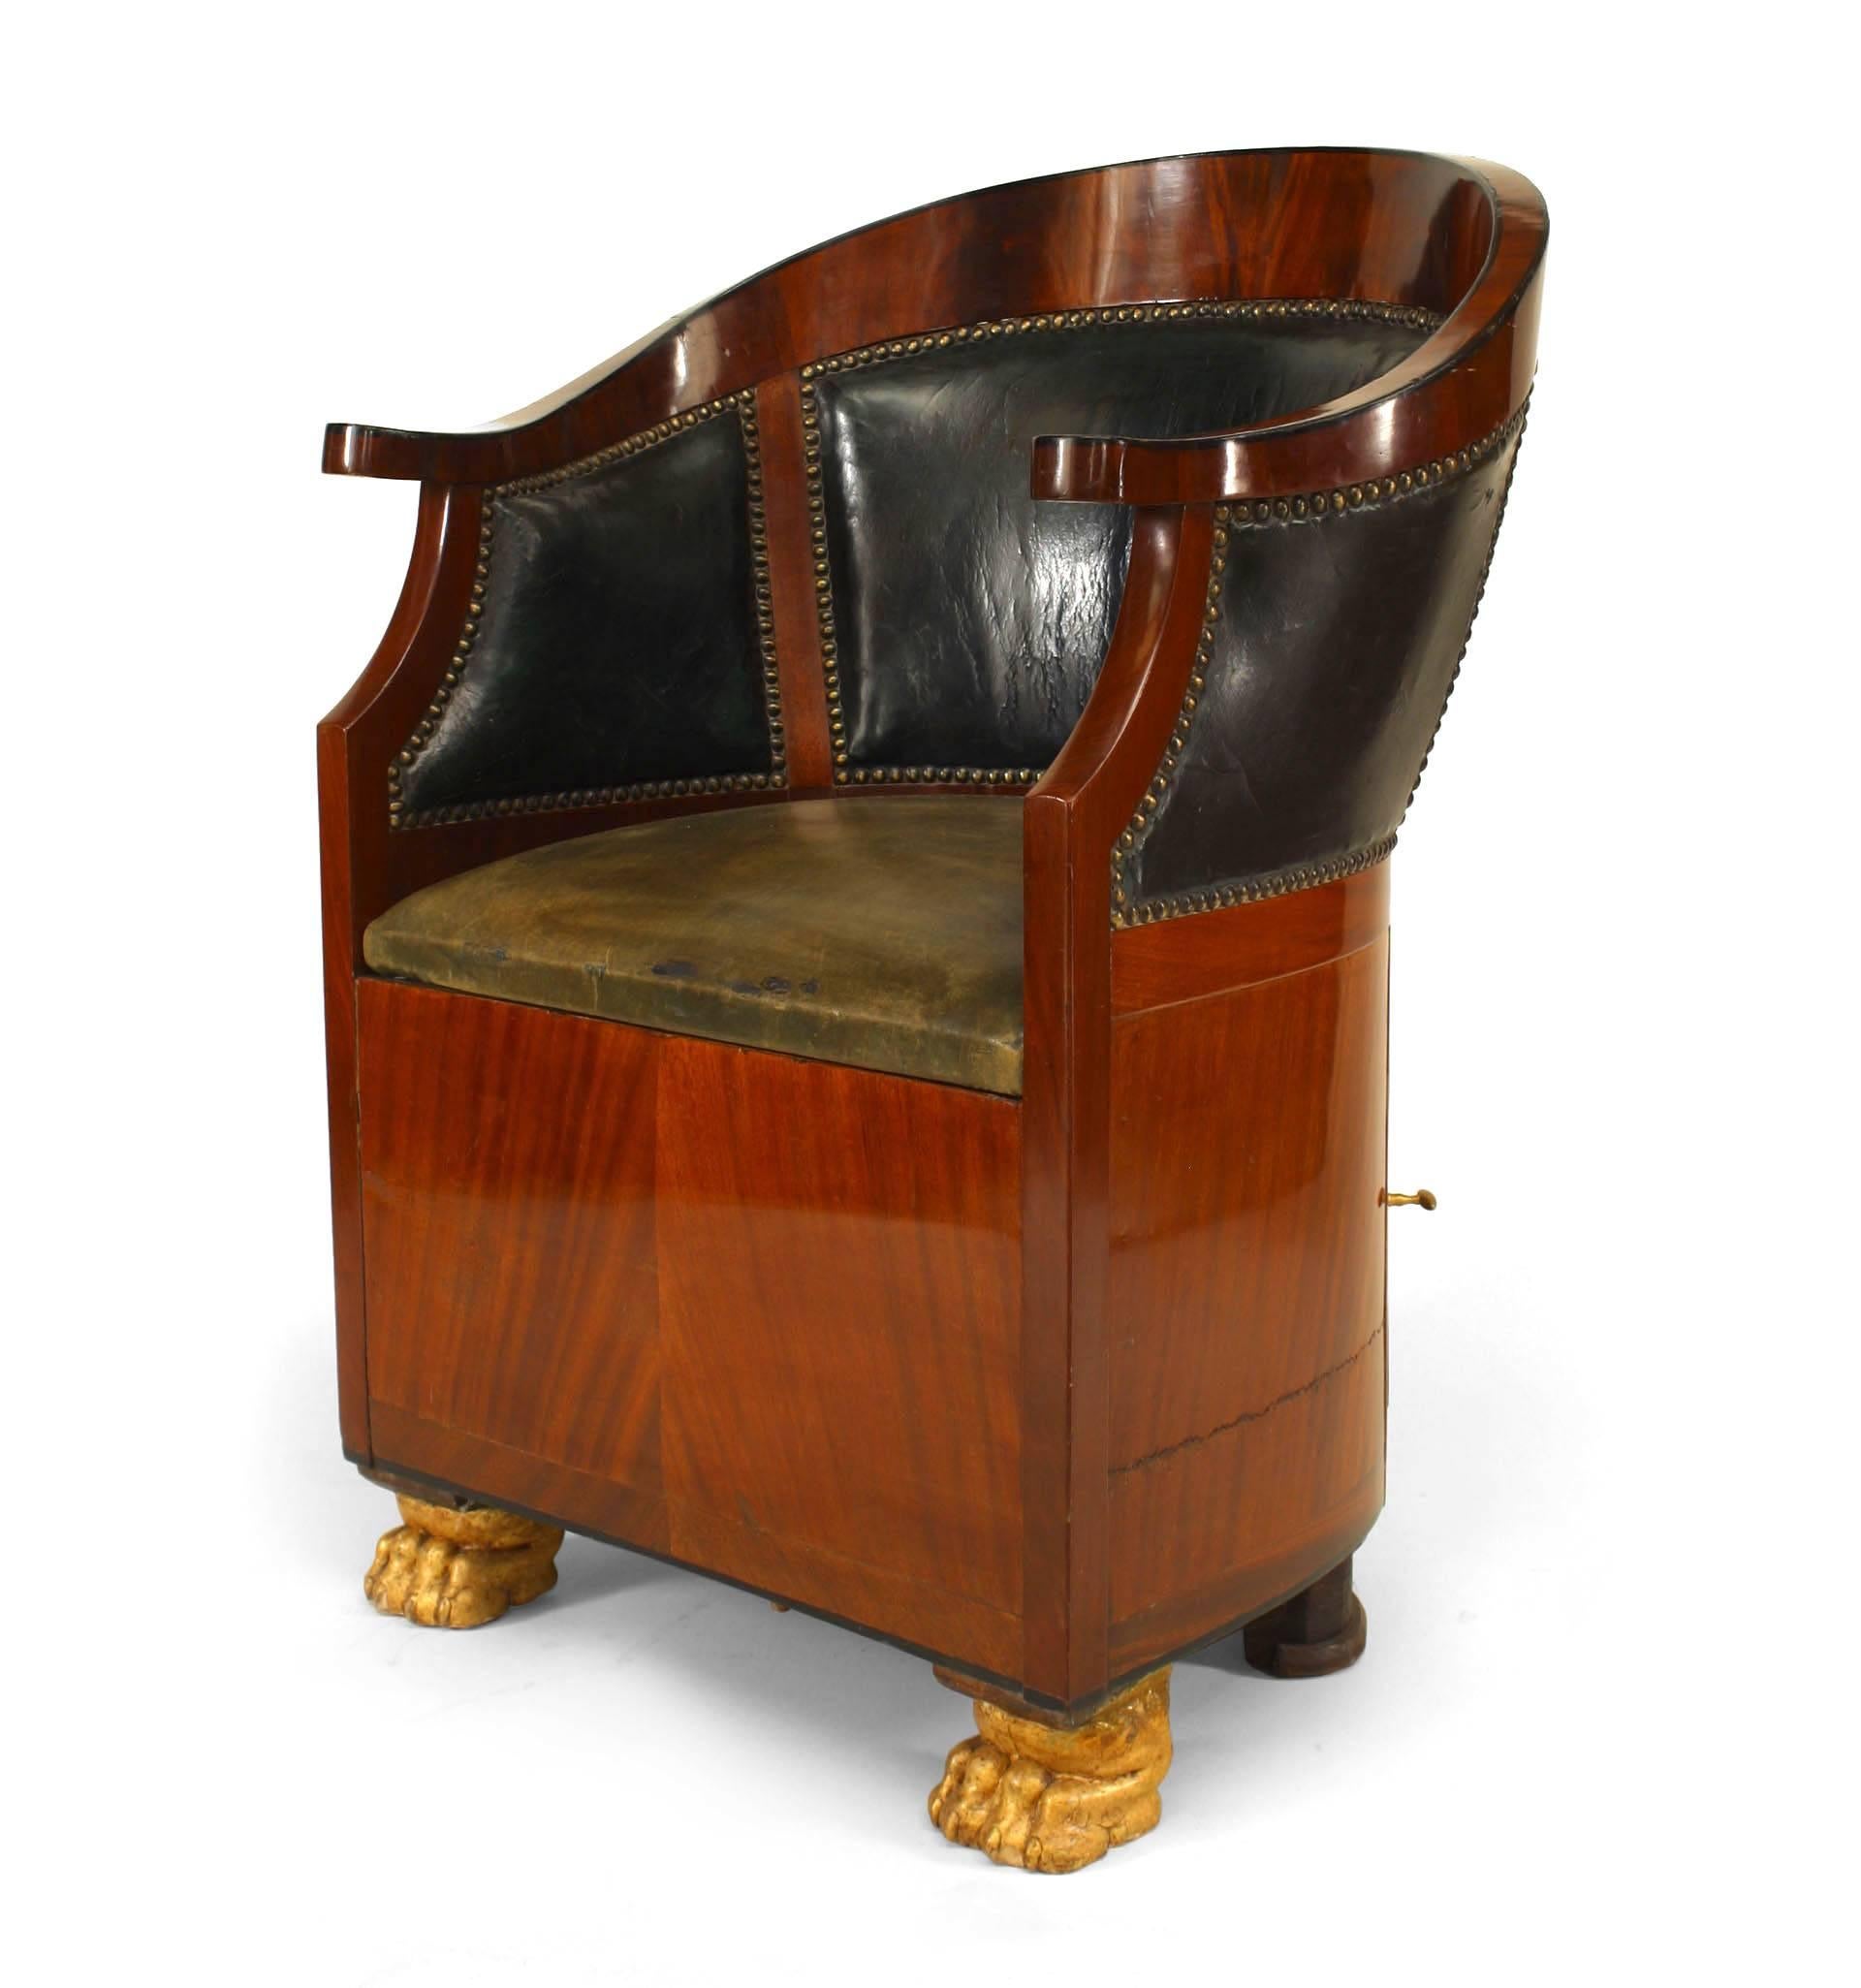 French Empire-style (19th Century) leather round back bergere arm chair with commode base.
